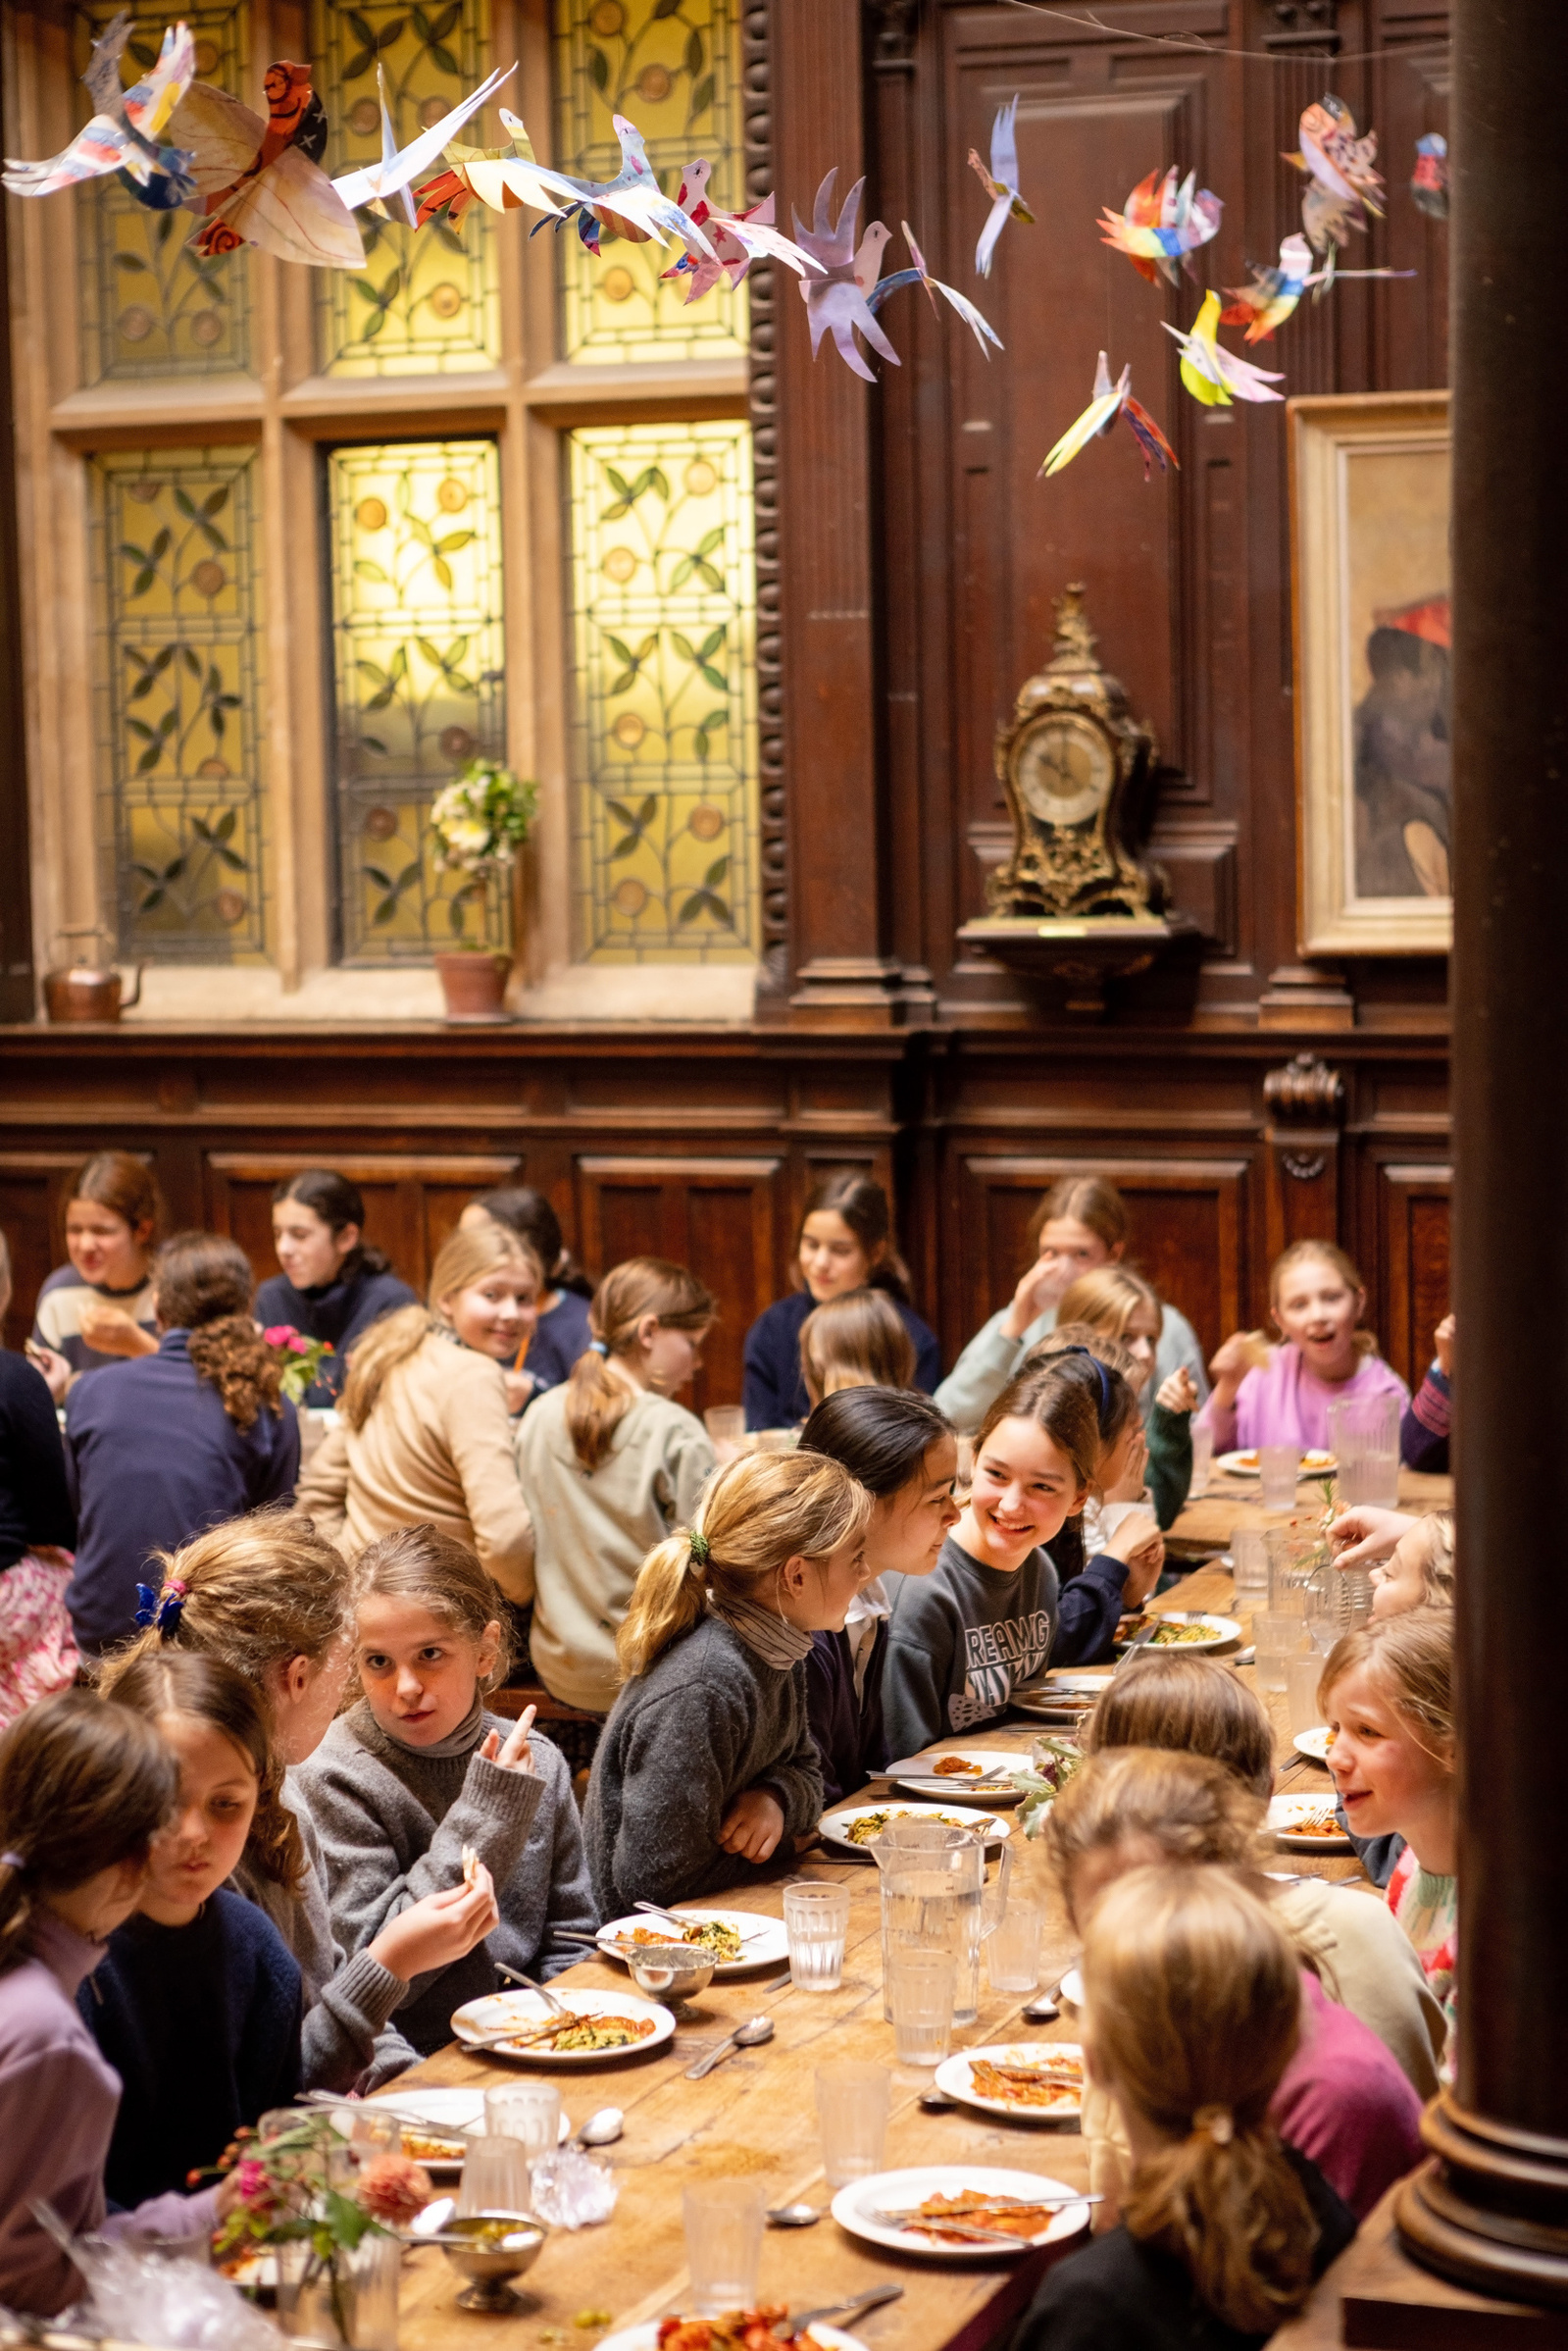 Pupils sit at long tables in the dining room of a grand private school. They are eating and laughing and paper birds hang from the ceiling in front of a grandfather clock.